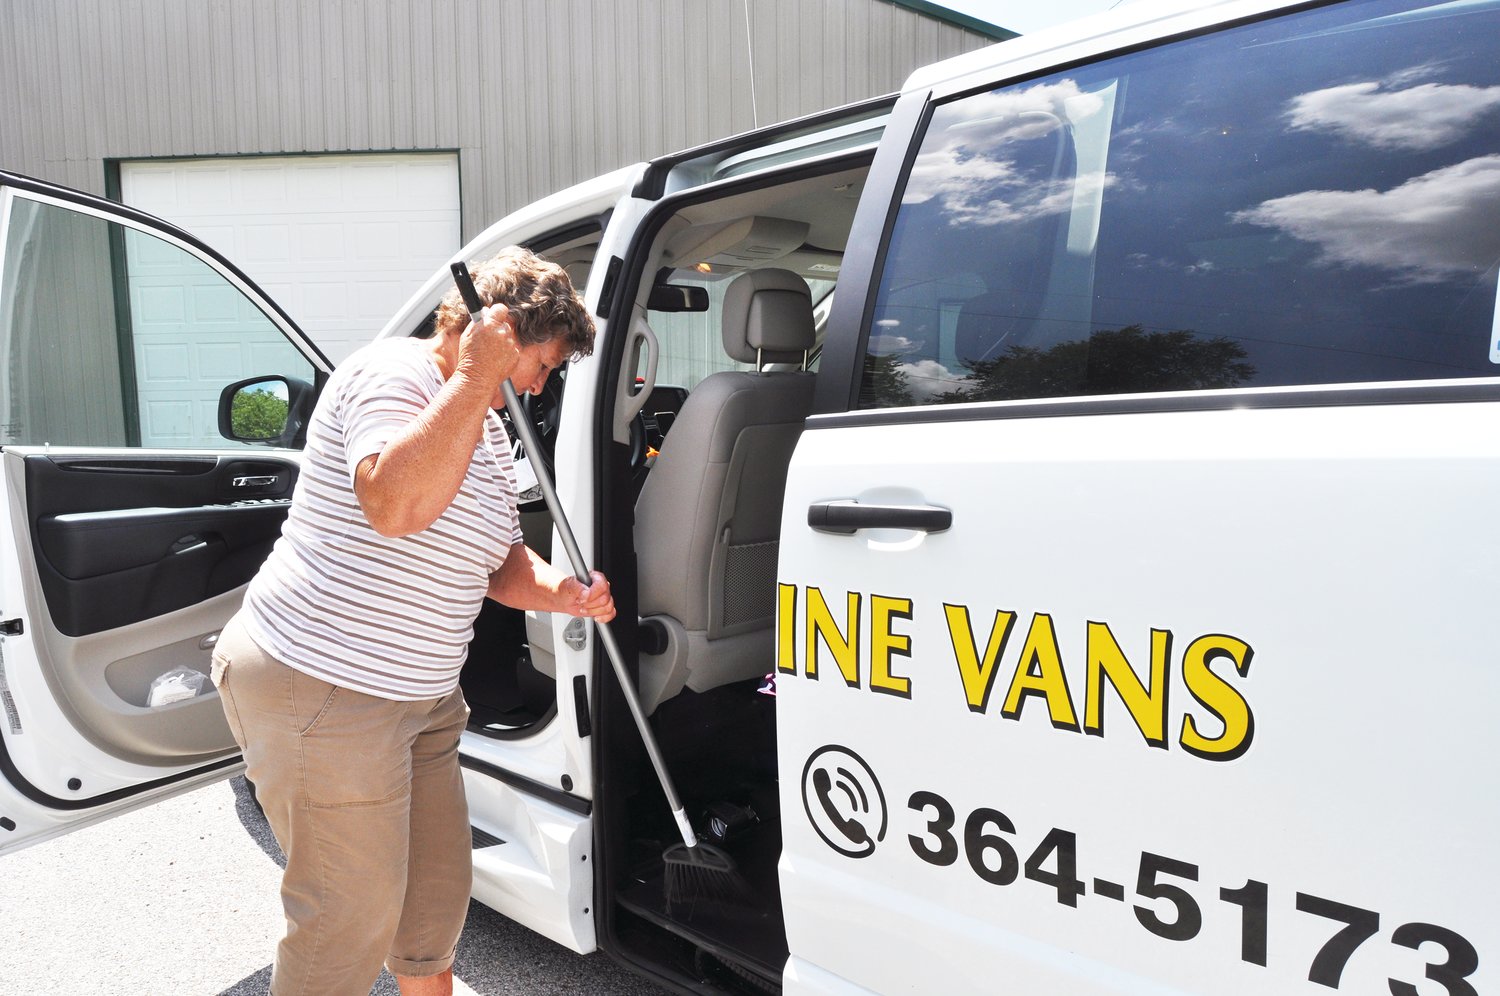 Roben Epps, lead driver for the Sunshine Vans program, sweeps out a van Friday in Milligan Park. The program is adding two new vans to its fleet through state and federal funding.